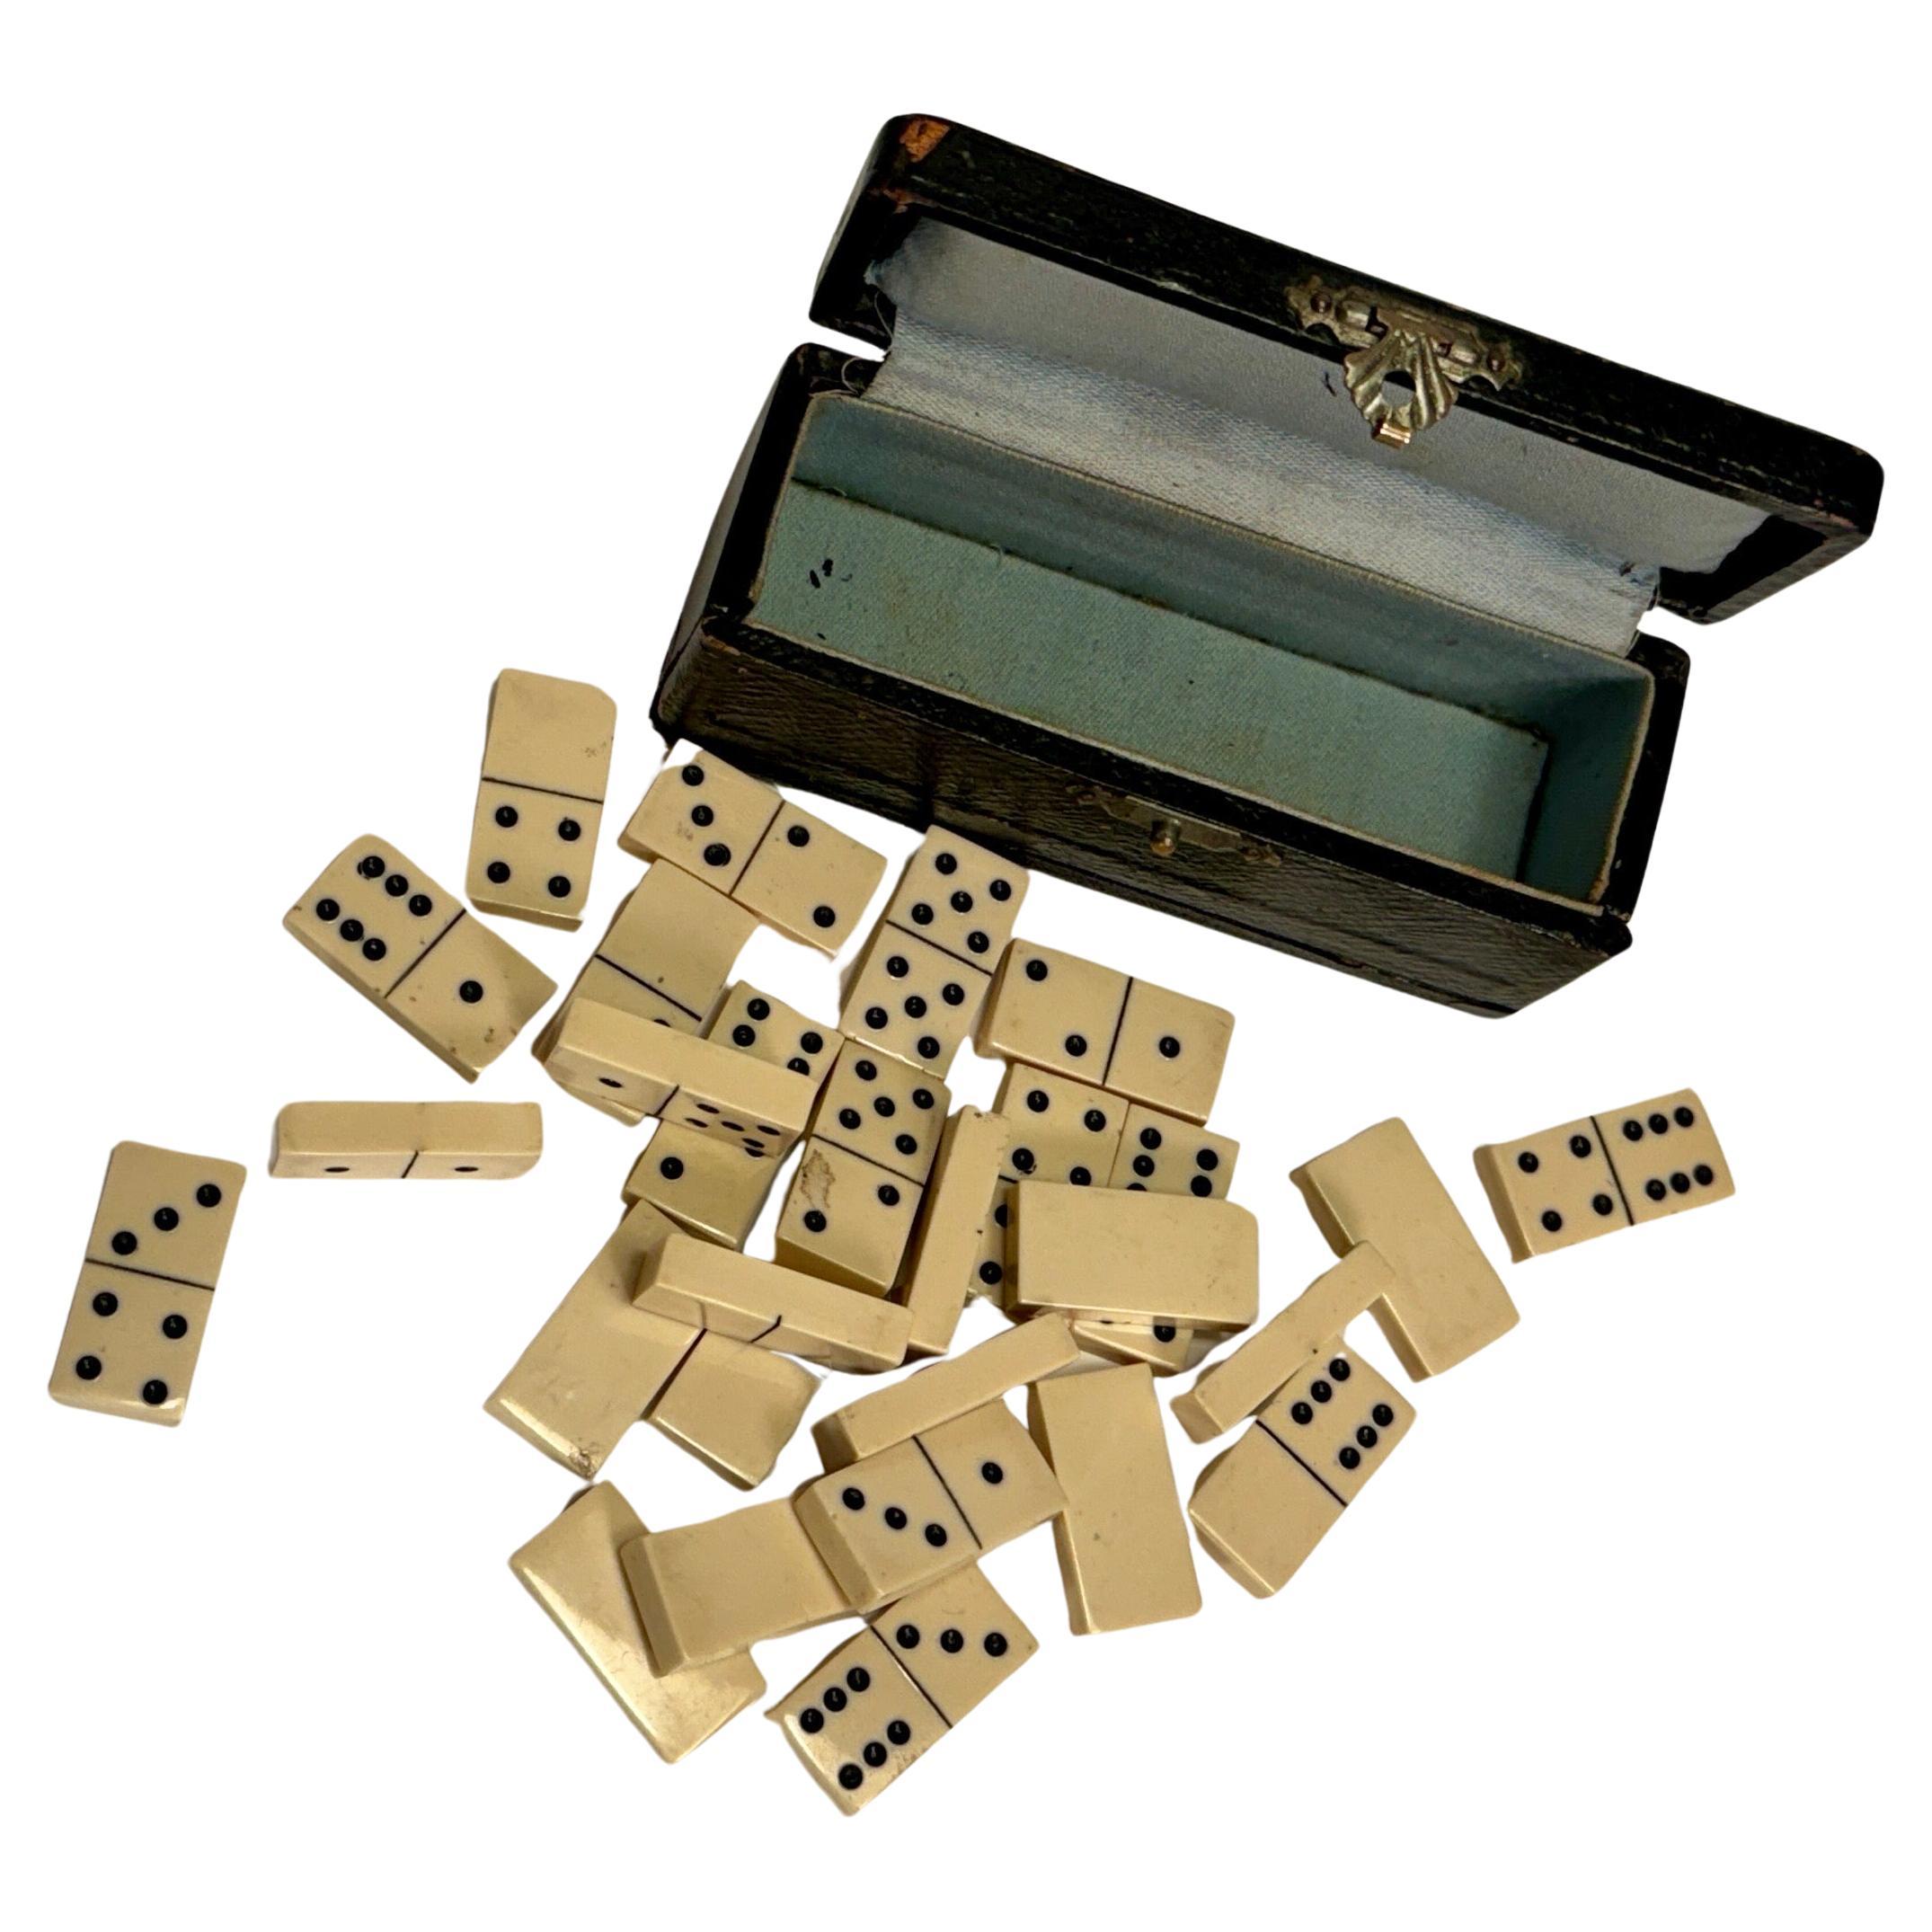 Small 28 Pieces Dominos Travel Size Board Game in Small Black Leather Incased Box.
Each piece measures 1.1 by 0.6 by 0.2 inches.